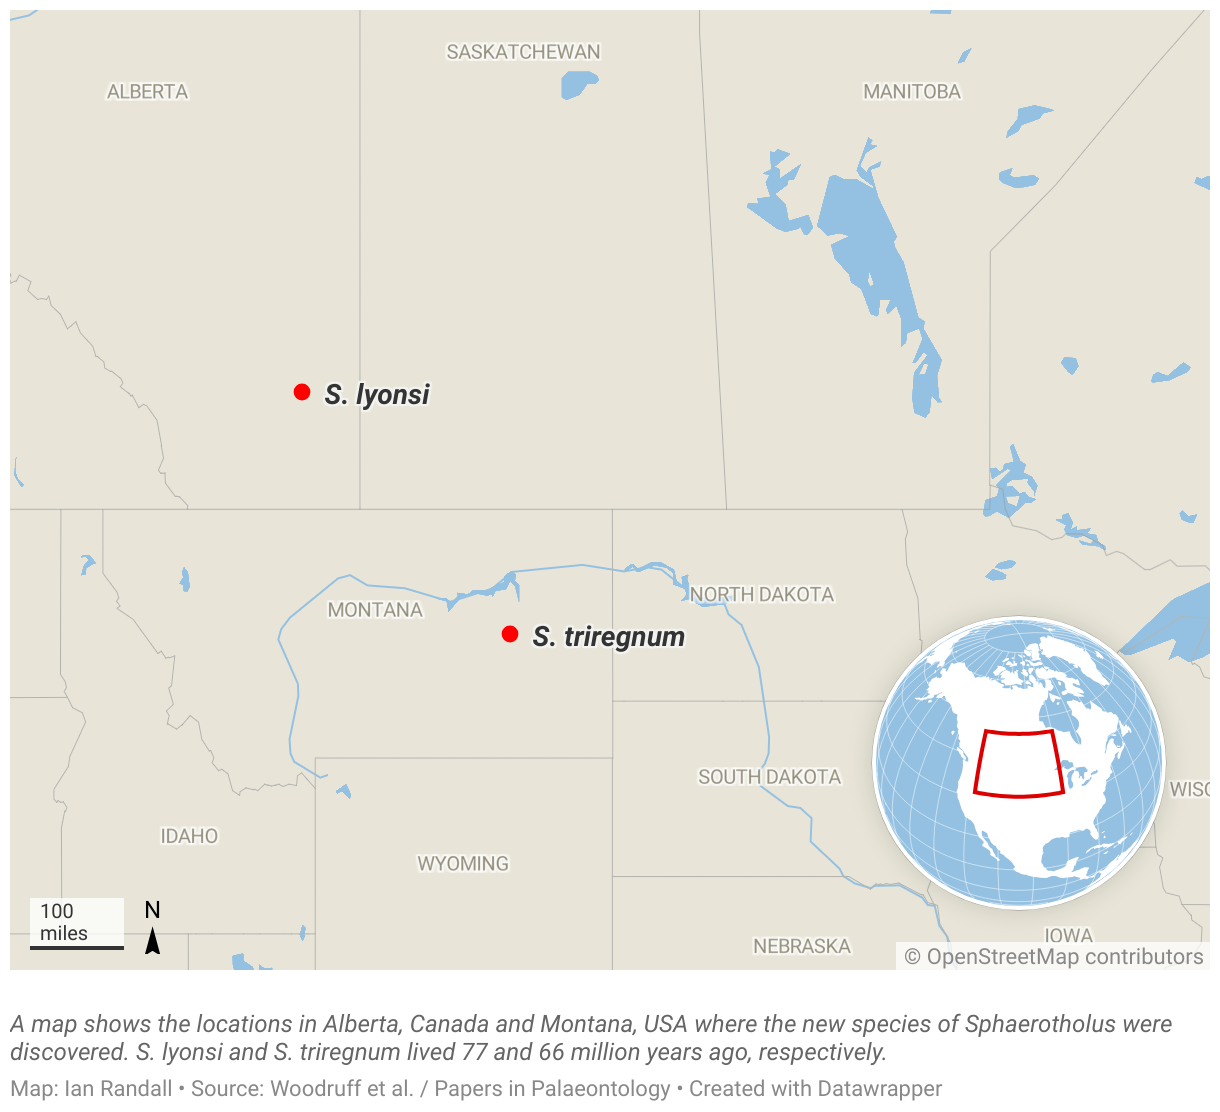 A map shows the locations in Alberta, Canada and Montana, USA where the new species of Sphaerotholus were discovered.